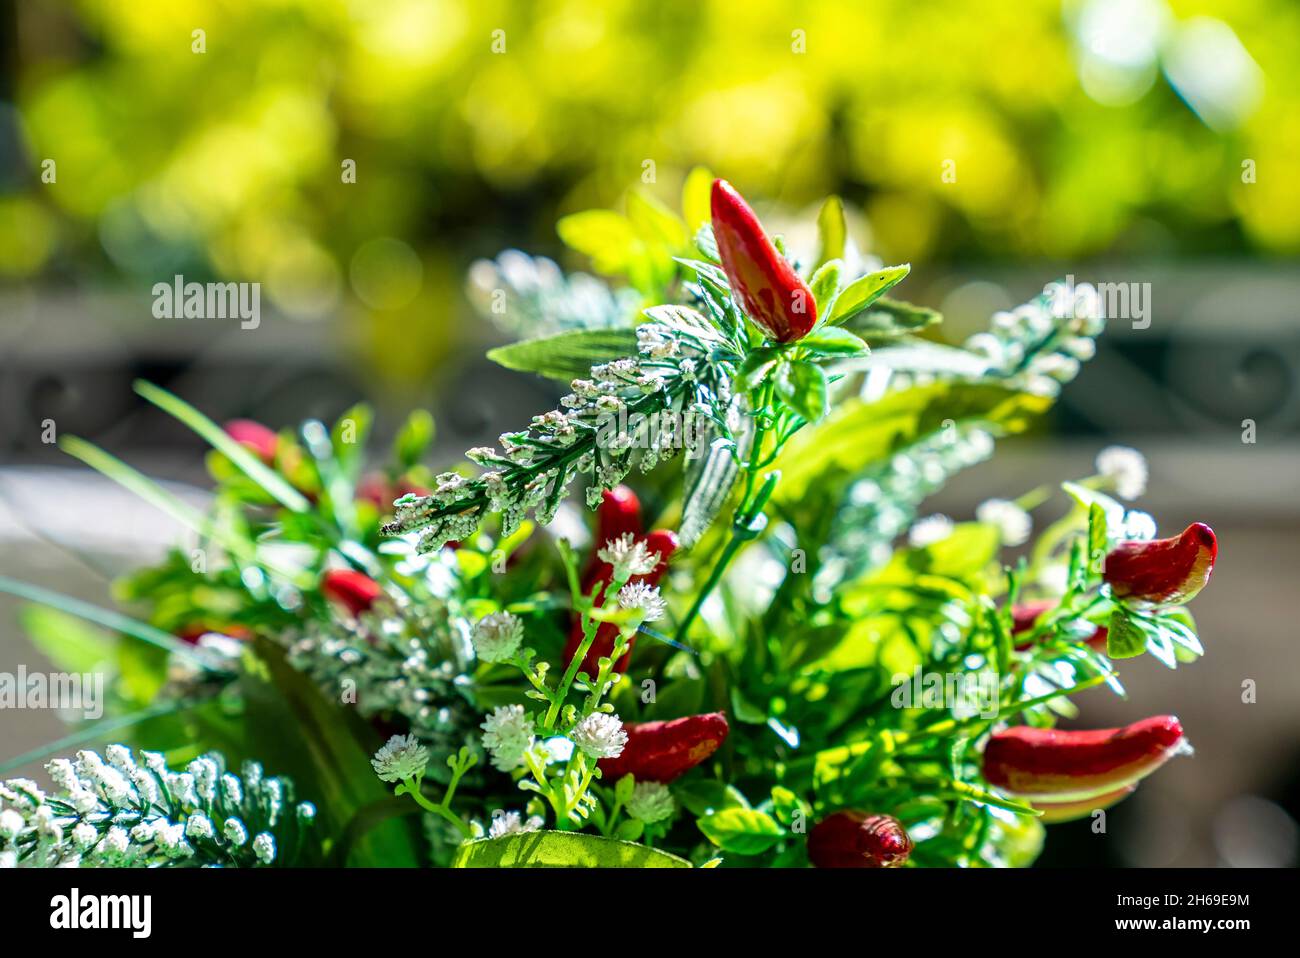 Close up of red chilli plant with flowers and stem Stock Photo